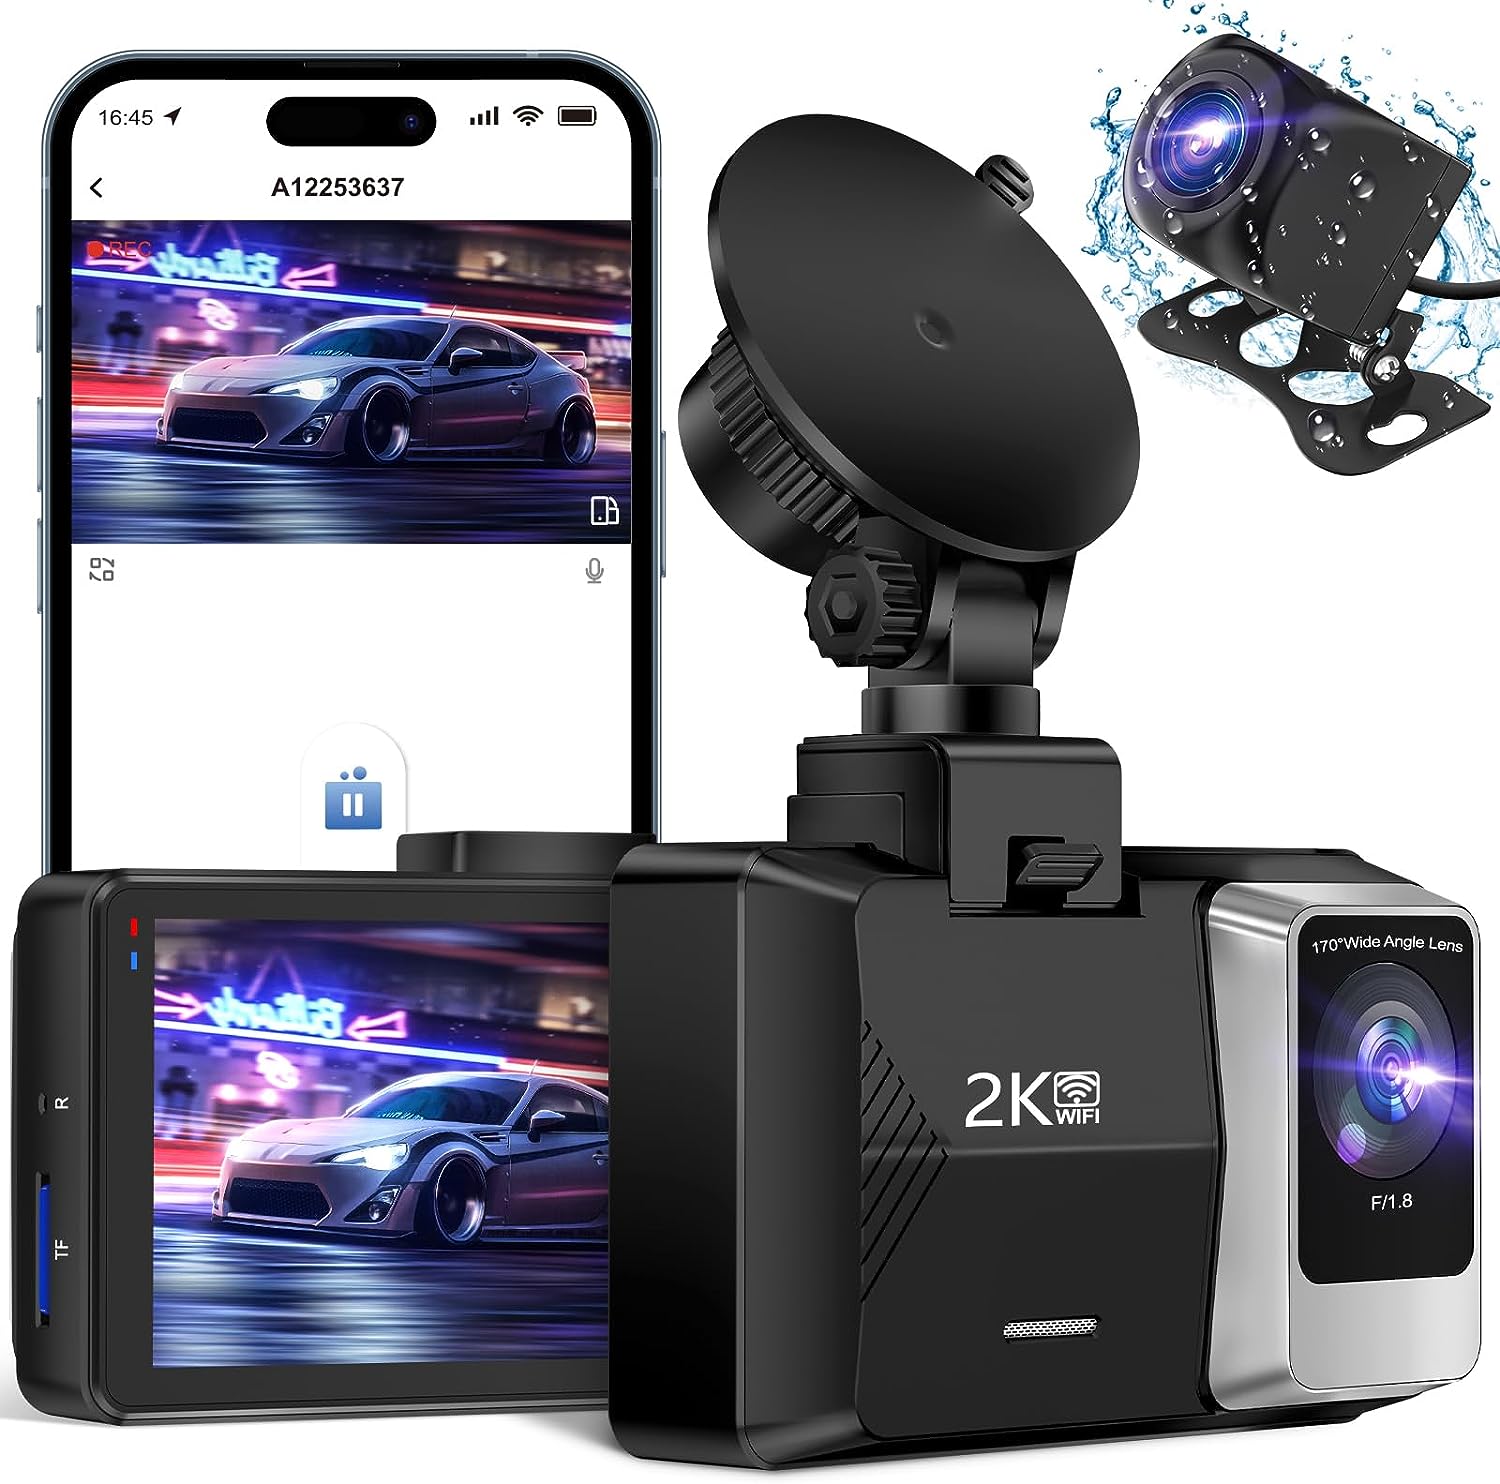 Dash Cam, Dash Cam Front and Rear, Dash Camera 2K Full HD with 32GB SD Card, Built-in Wi-Fi, G-Sensor, Loop Recording, Parking Monitor